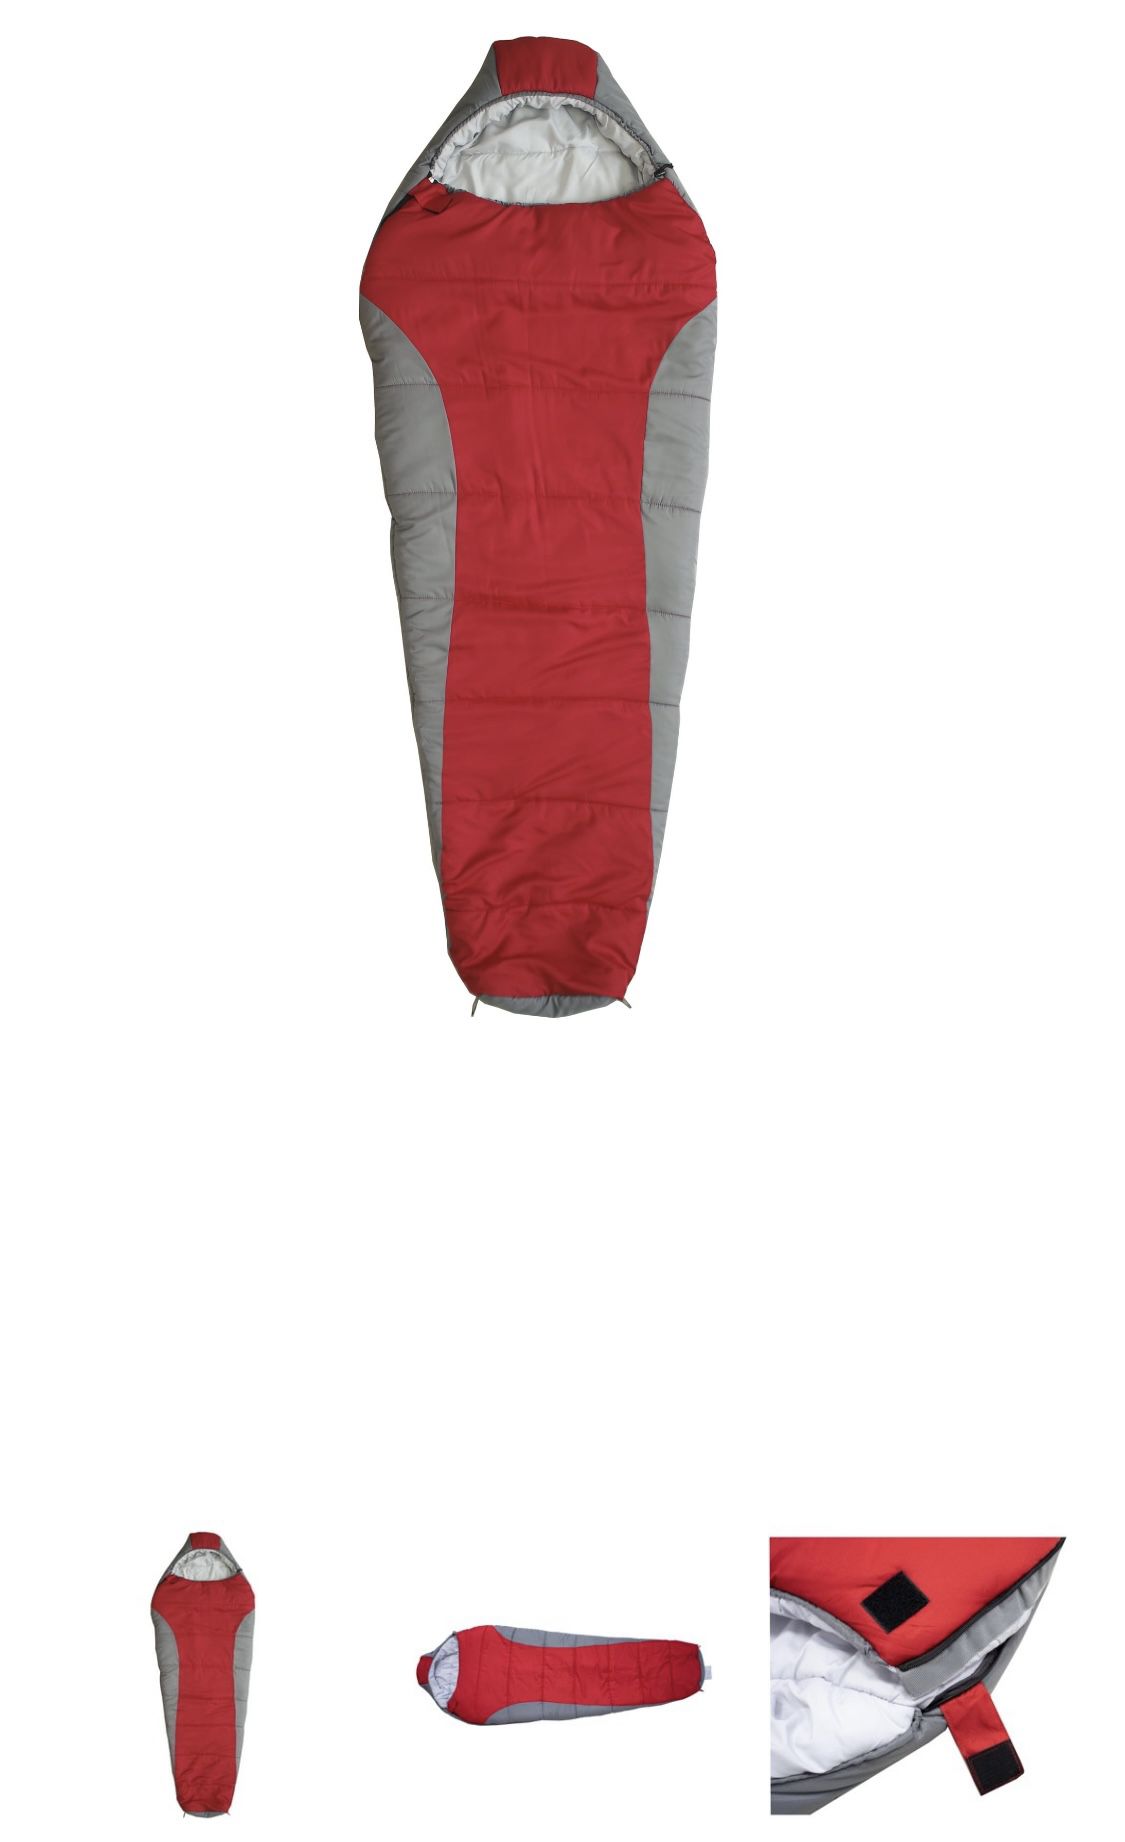 Ozark Trail 10f With Soft Liner Camping Sleeping Bag 